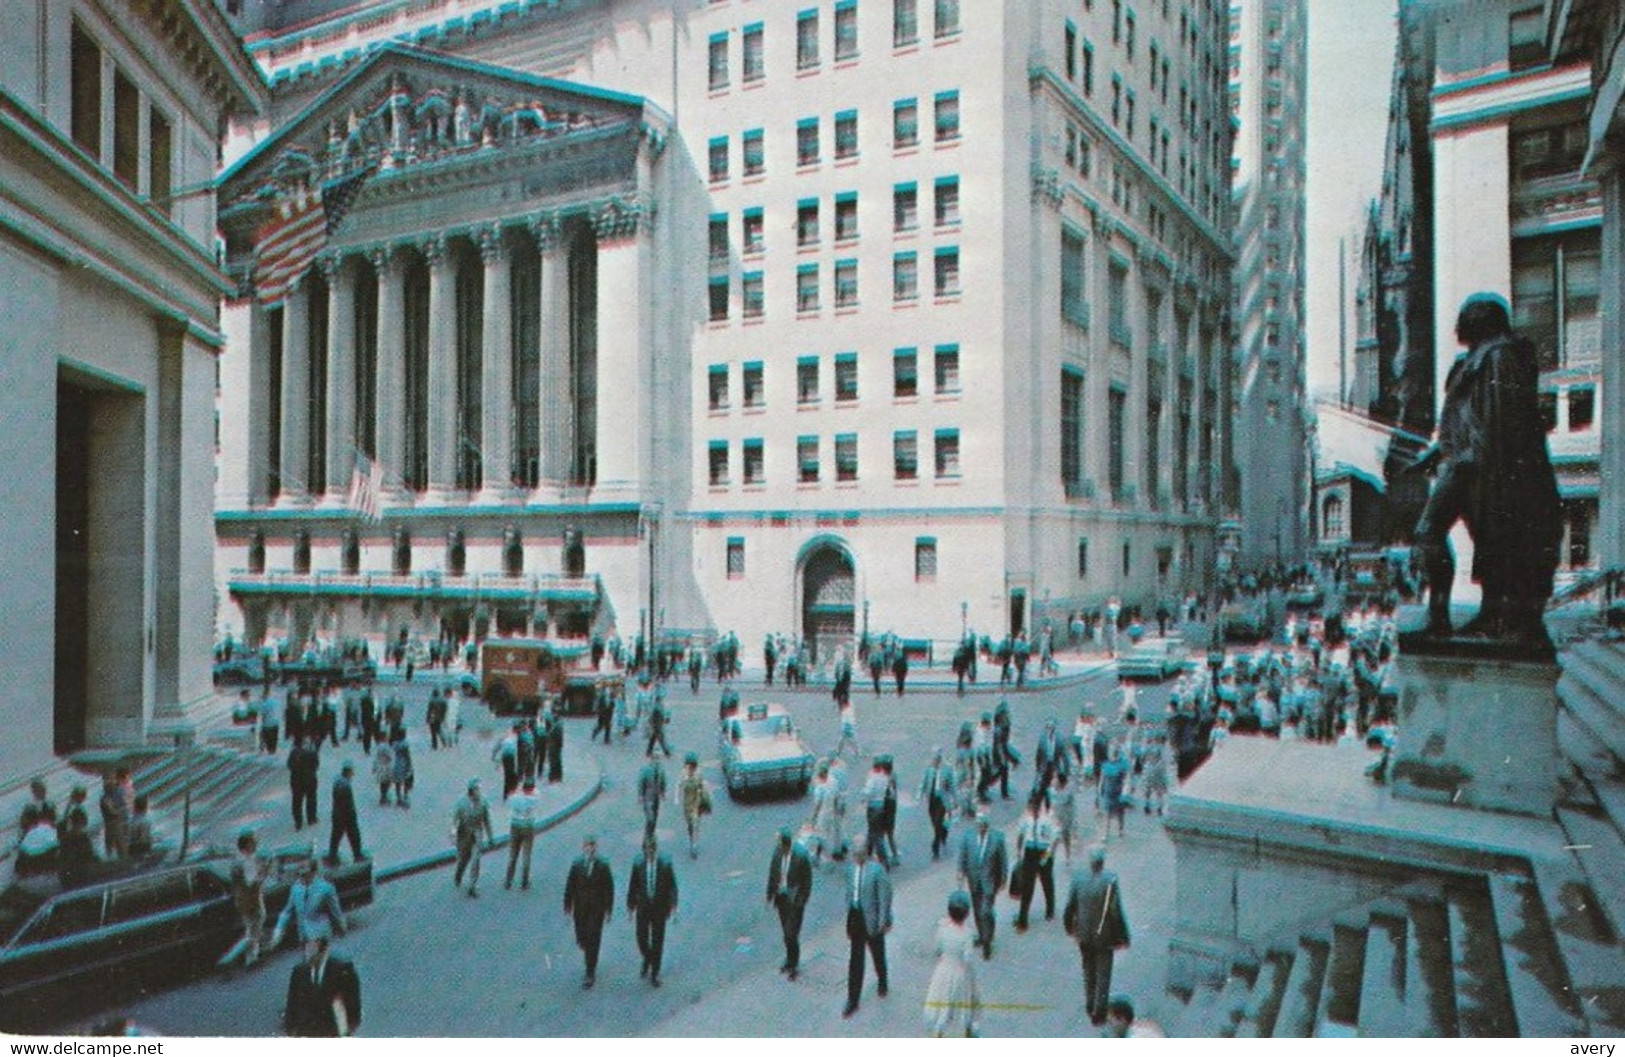 Wall Street And The New York Stock Exchange, New York City - Wall Street